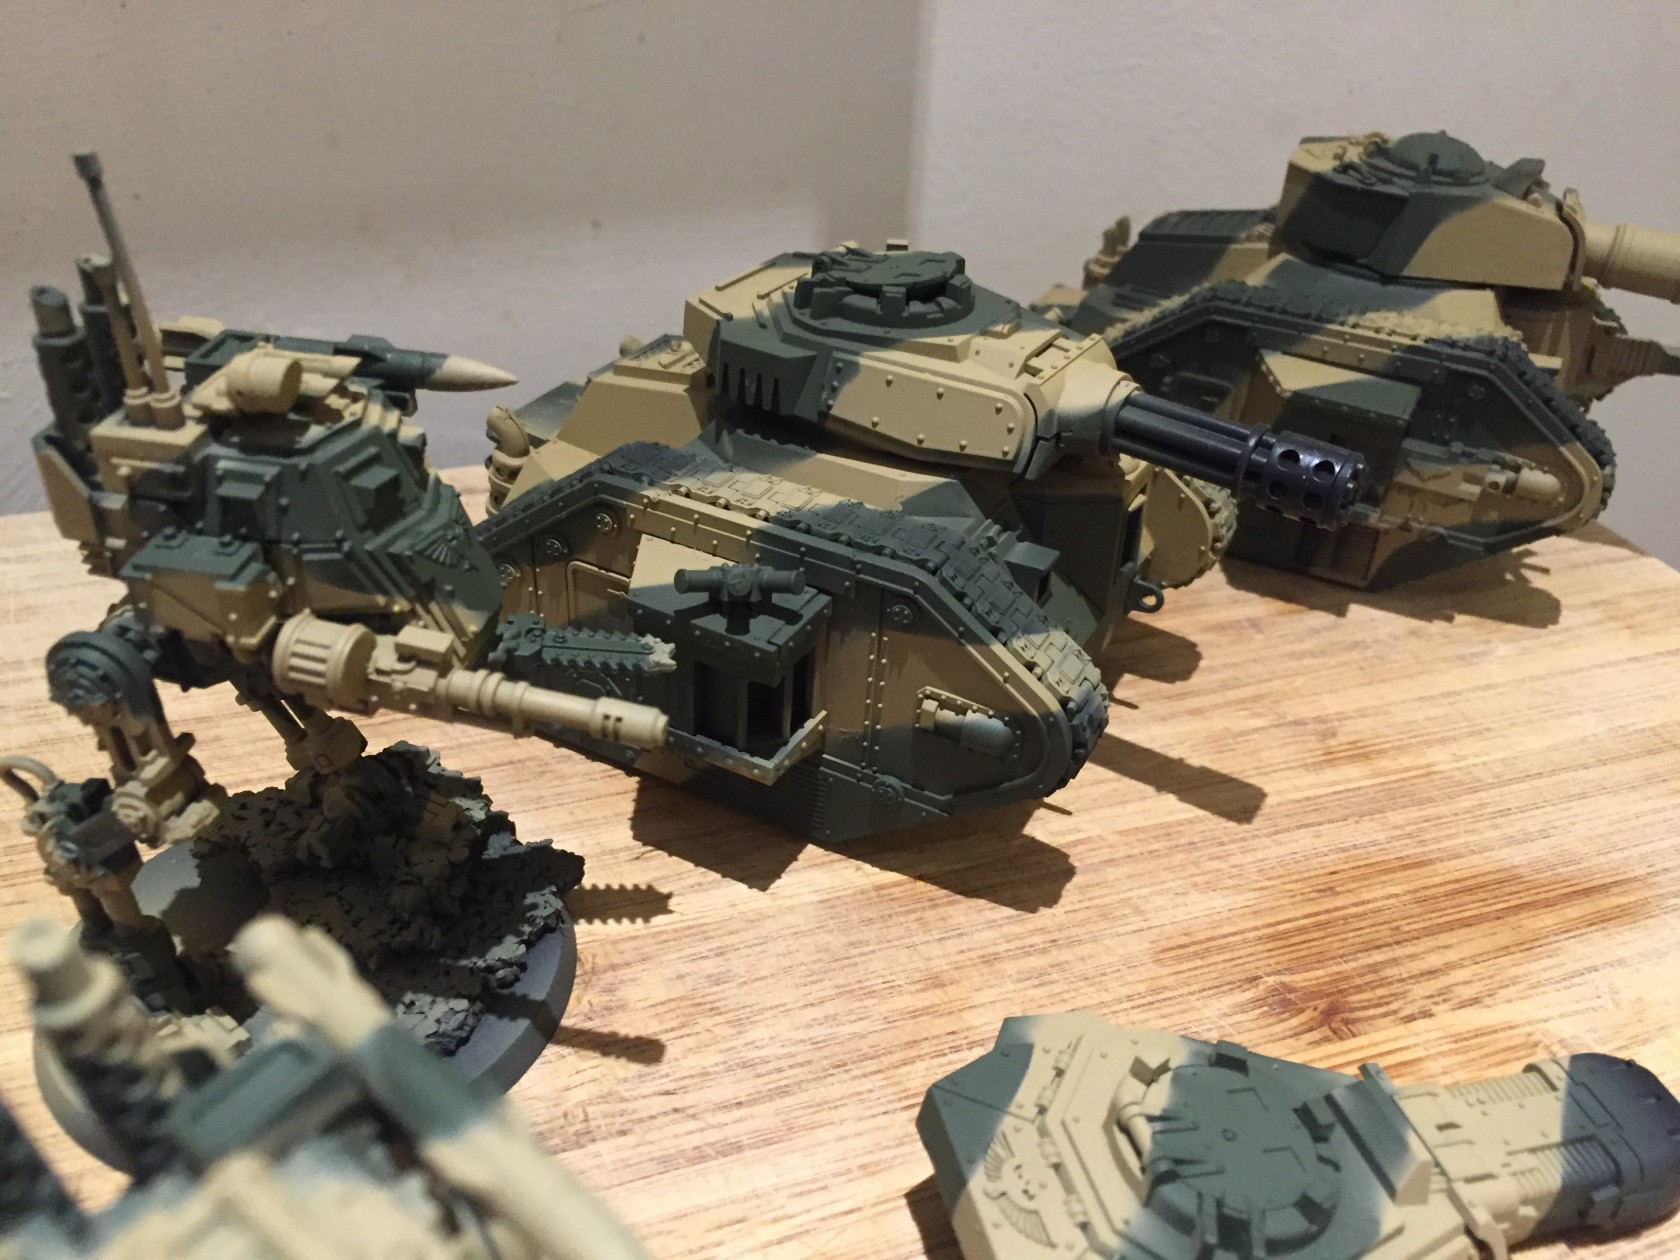 Cadian Camo Update with My Airbrush